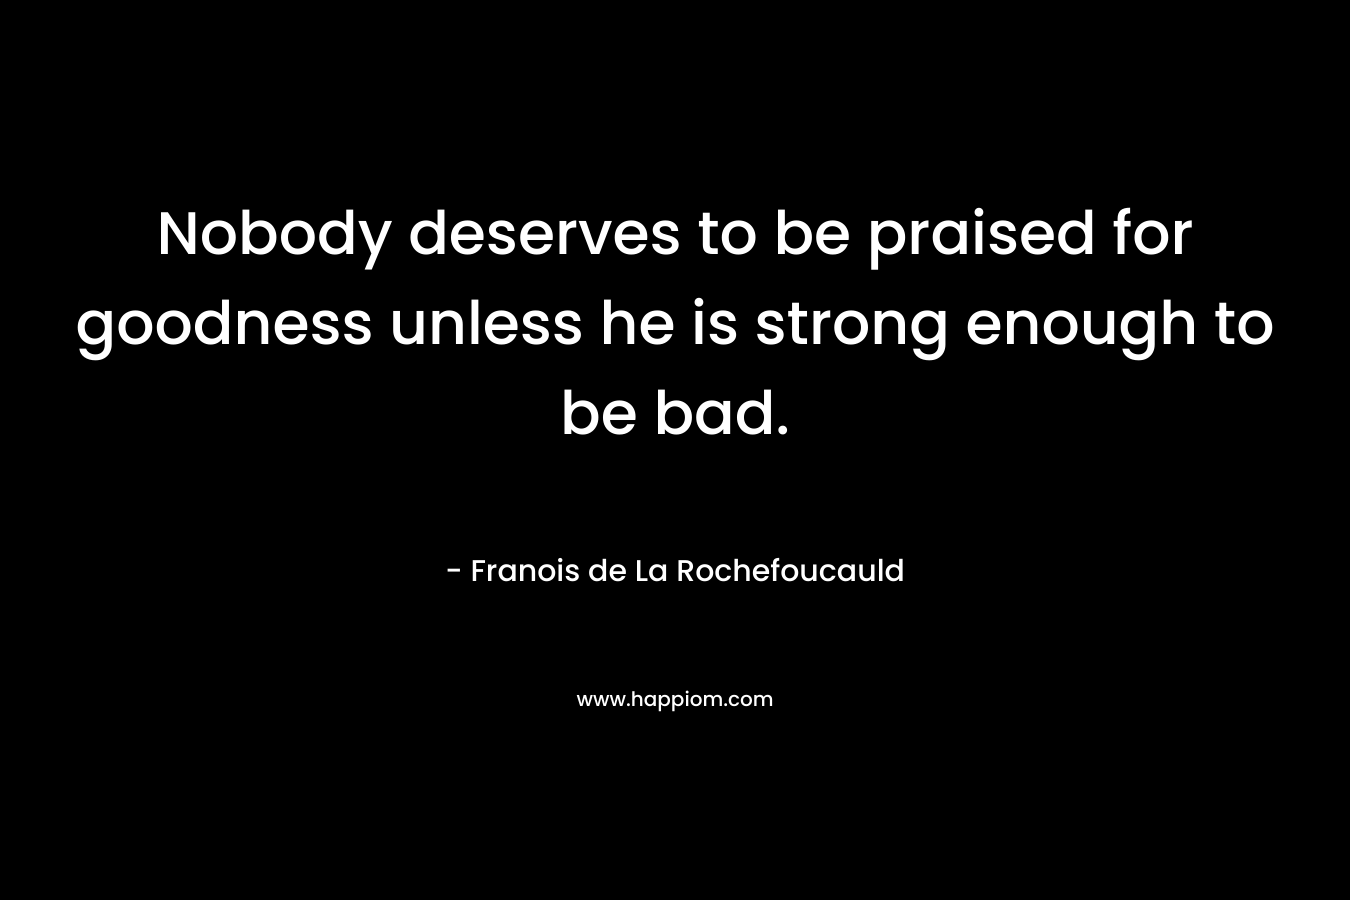 Nobody deserves to be praised for goodness unless he is strong enough to be bad. – Franois de La Rochefoucauld